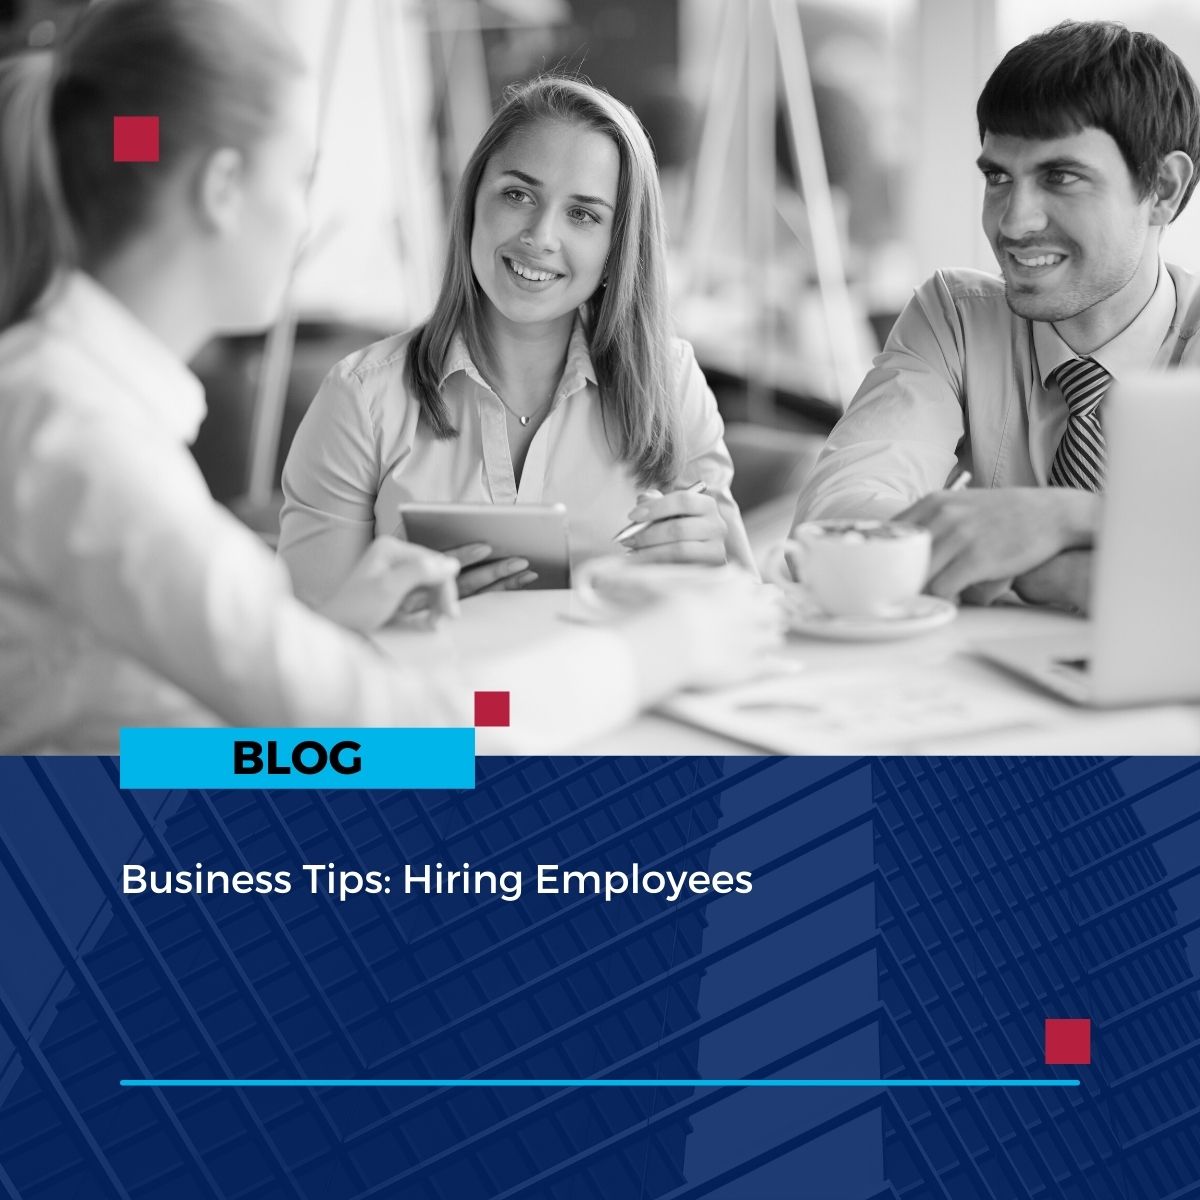 Business Tips: Hiring Employees